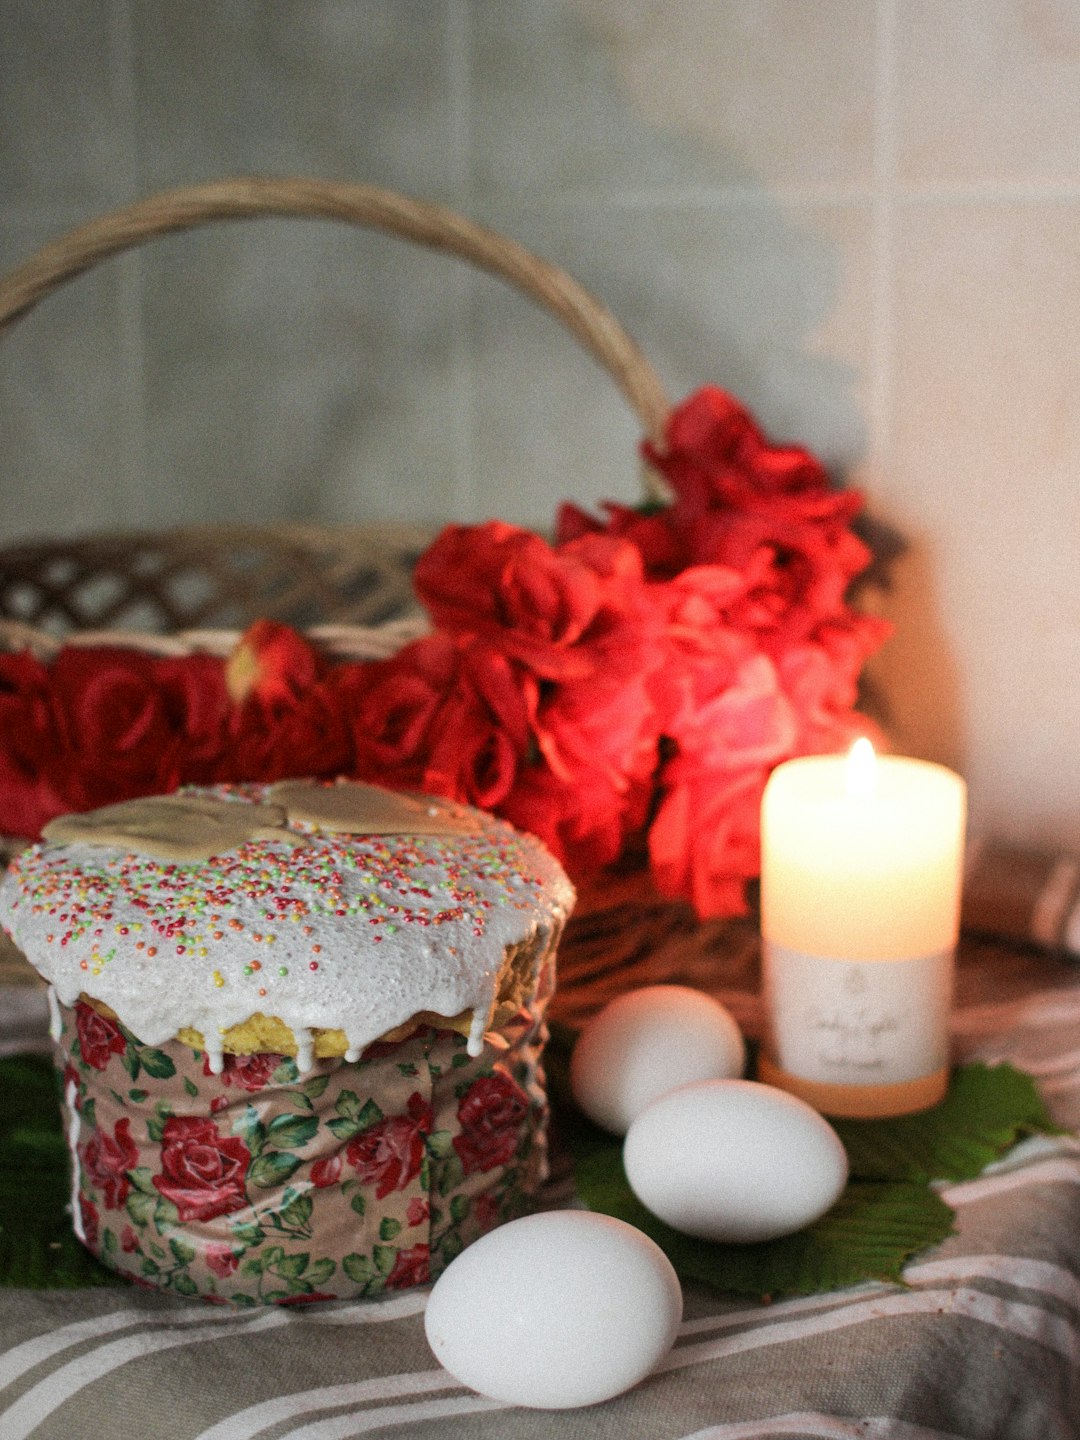 red and white rose on brown wicker basket